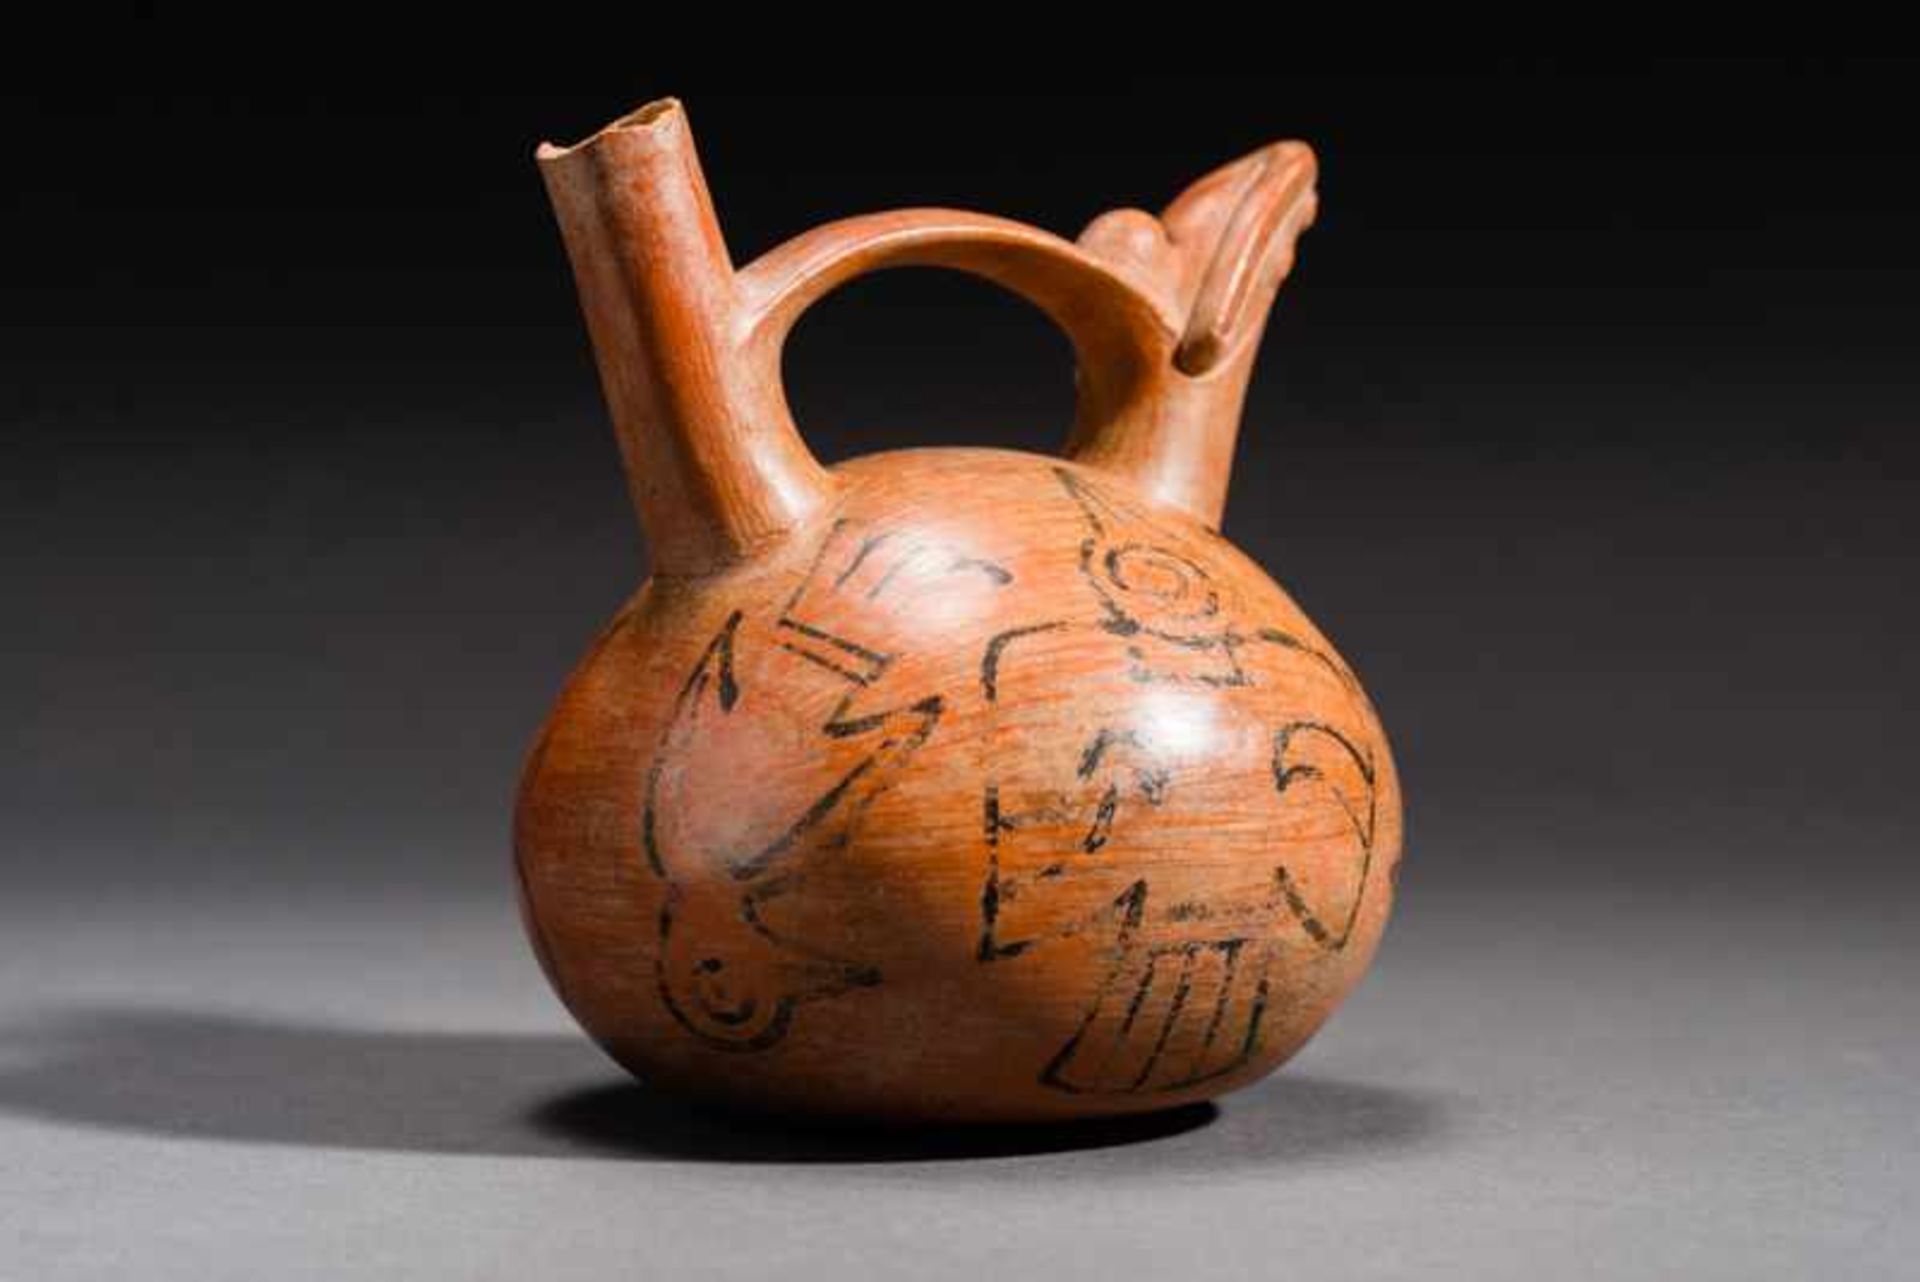 PIPE VESSEL WITH AVIARY DECORATION Terracotta and pain. Salinar, ca. 300 anteSpherical vessel with a